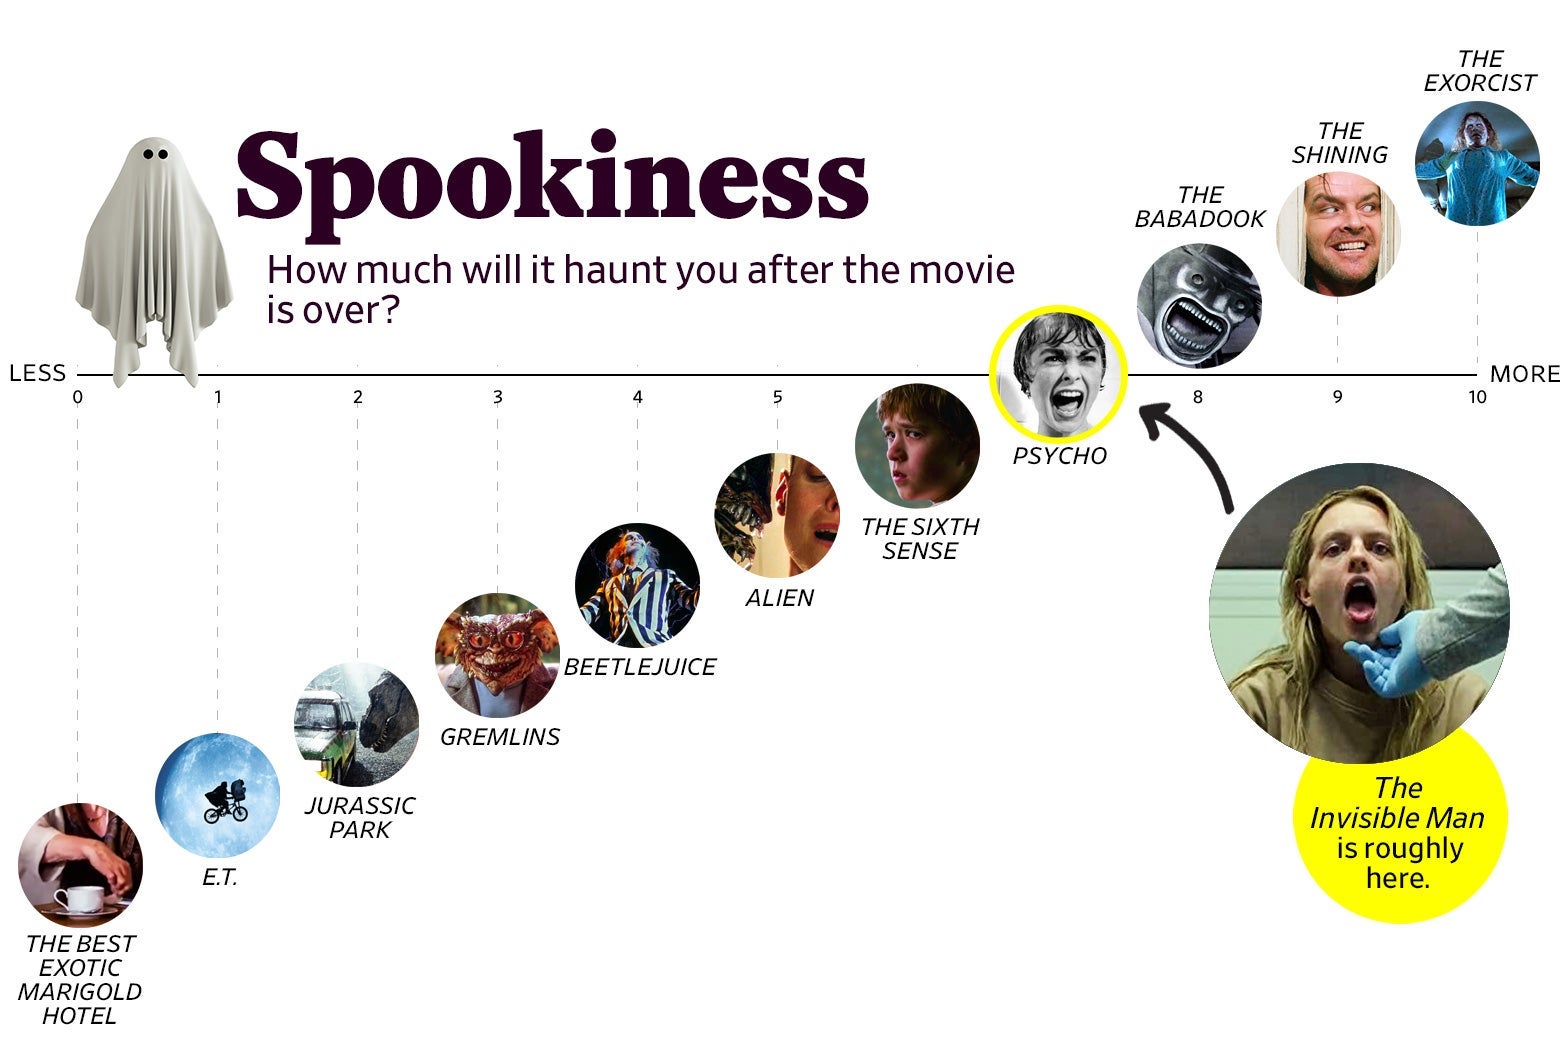 A chart titled “Spookiness: How much will it haunt you after the movie is over?” shows that The Invisible Man ranks a 7 in spookiness, roughly the same as Psycho. The scale ranges from The Best Exotic Marigold Hotel (0) to The Exorcist (10).